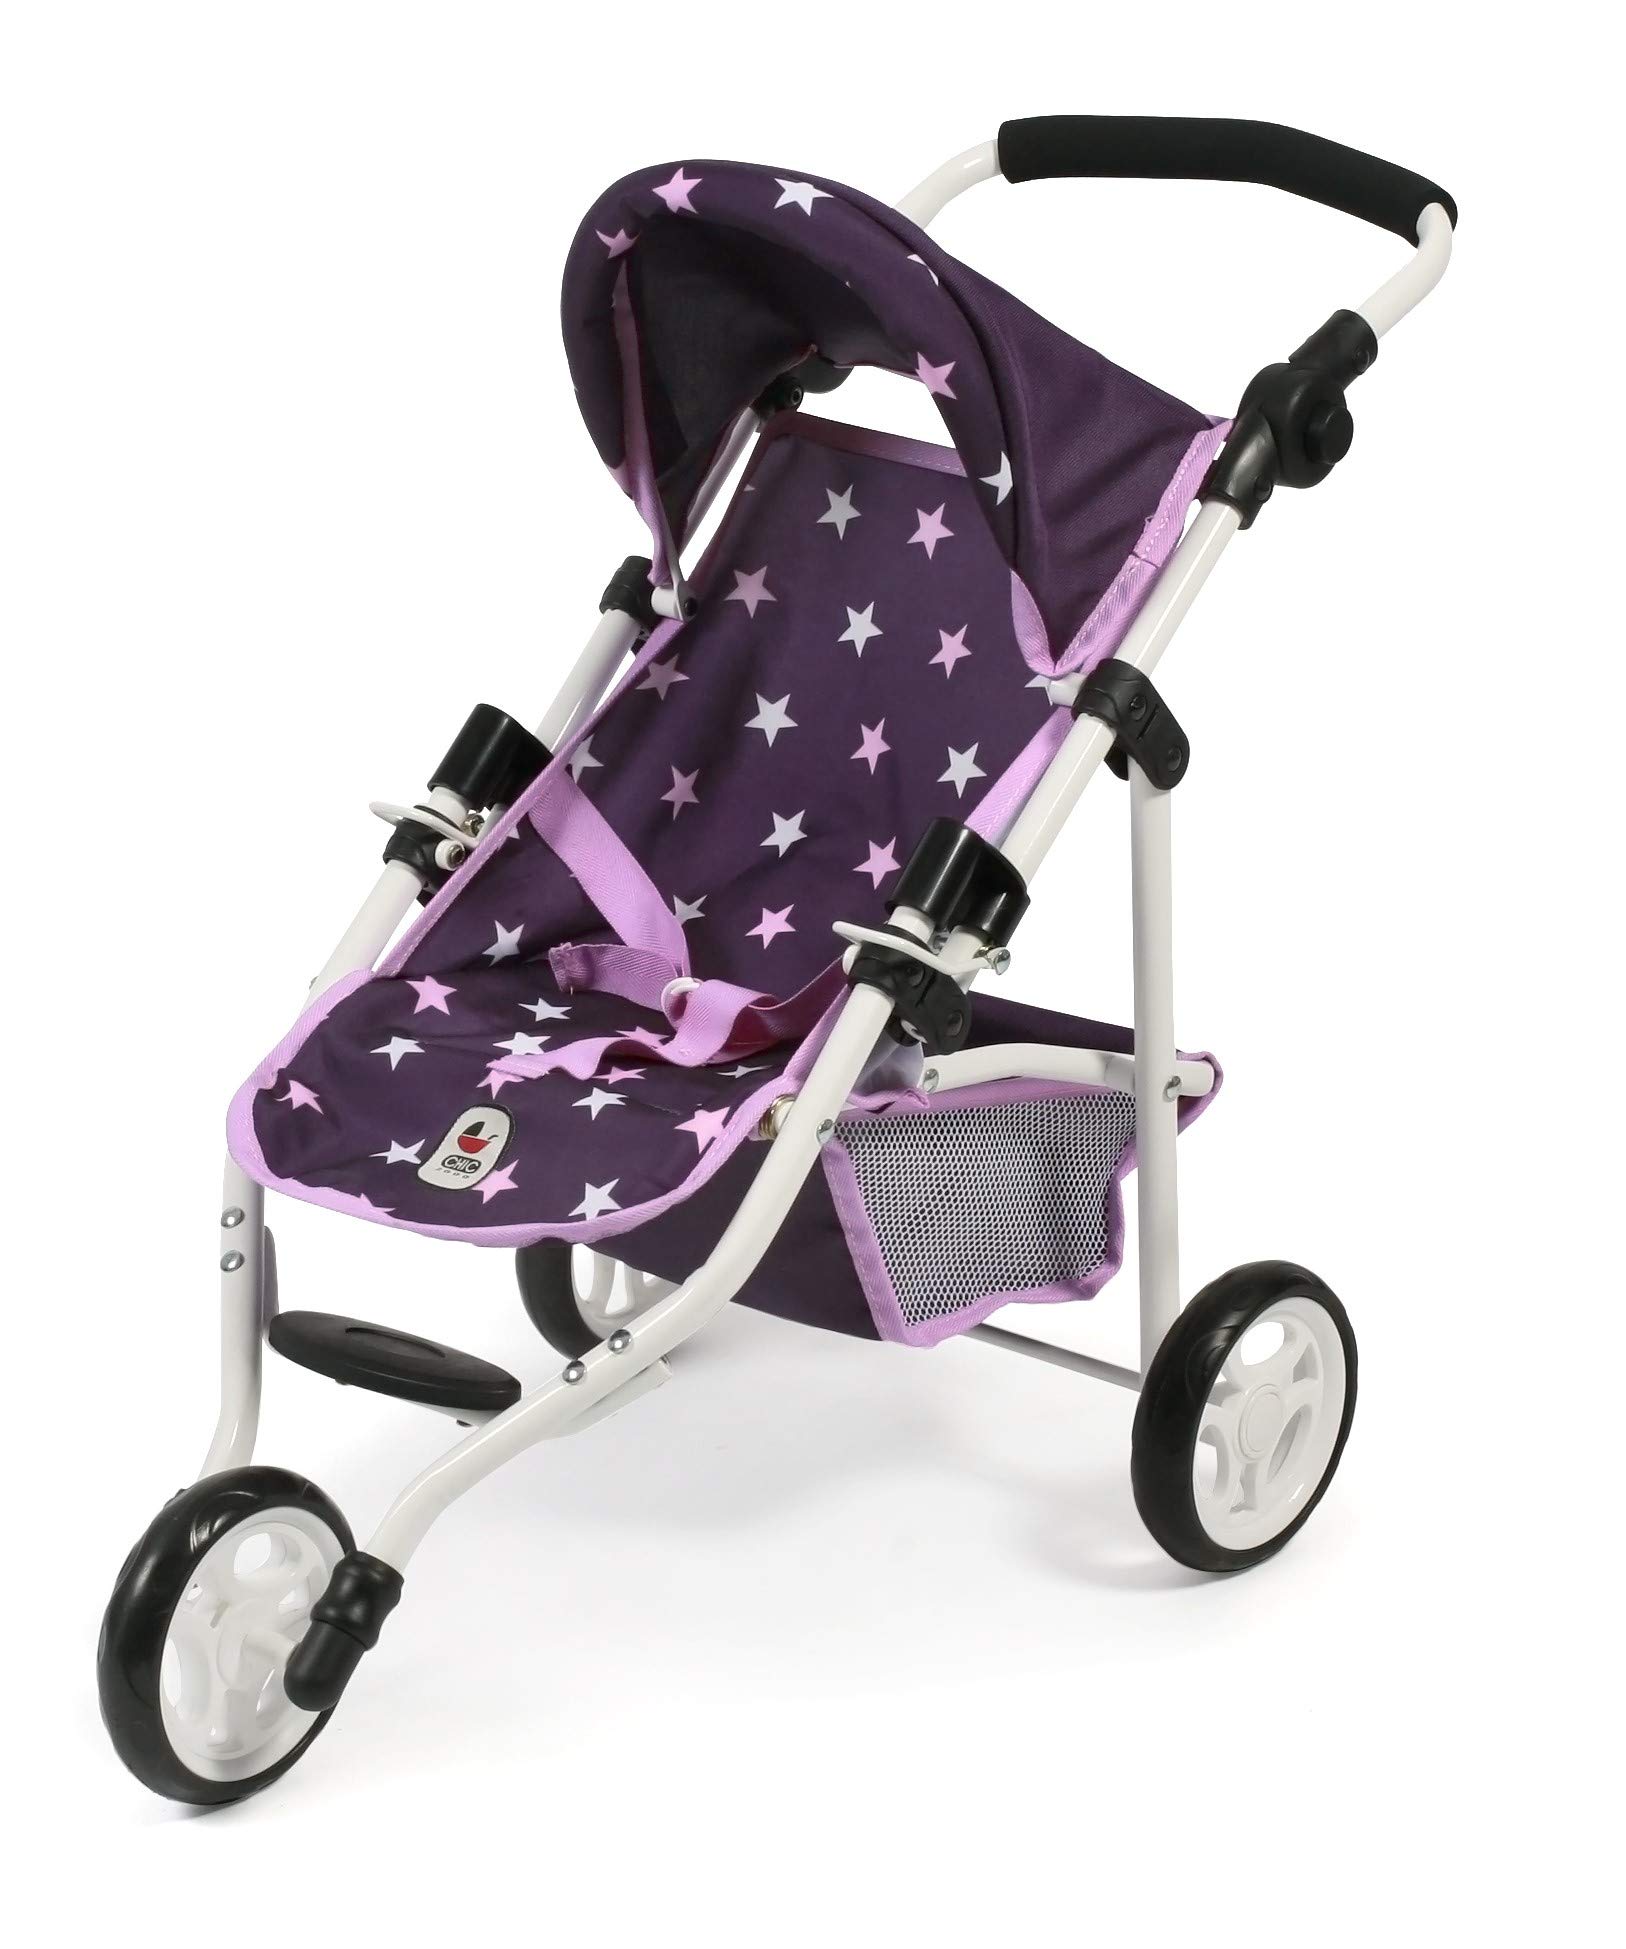 Bayer Chic 2000 - Puppenbuggy Lola, Jogging-Buggy, Puppenjogger, Puppenwagen, Stars lila, 70 x 33 x 62 cm